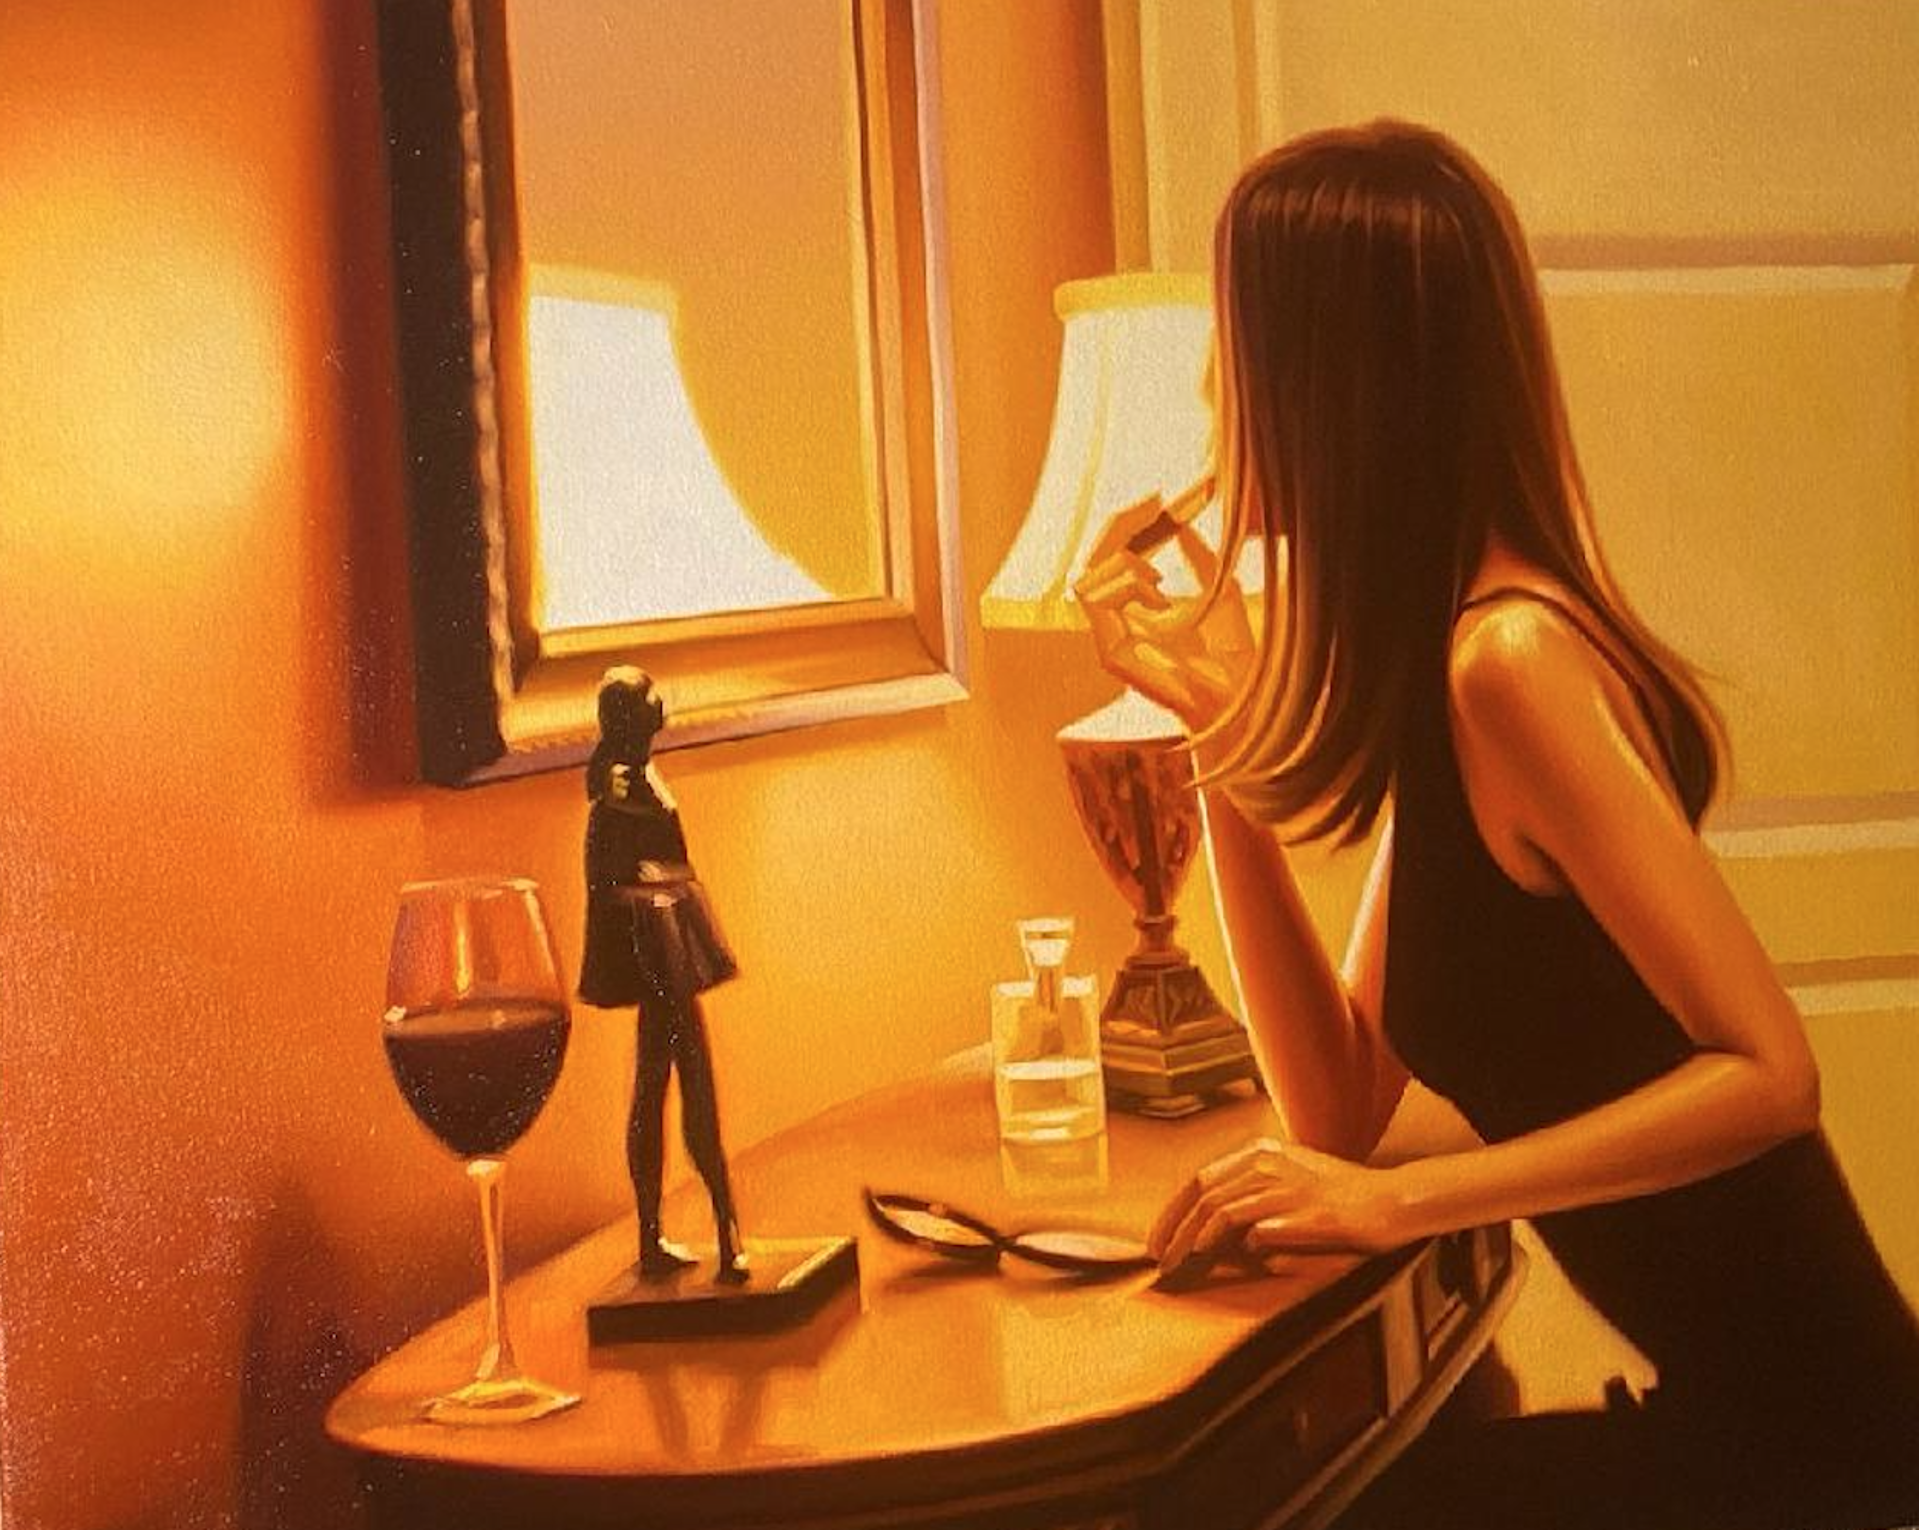 Special Commission for Kristi Timmons "Pretty Woman" by Carrie Graber